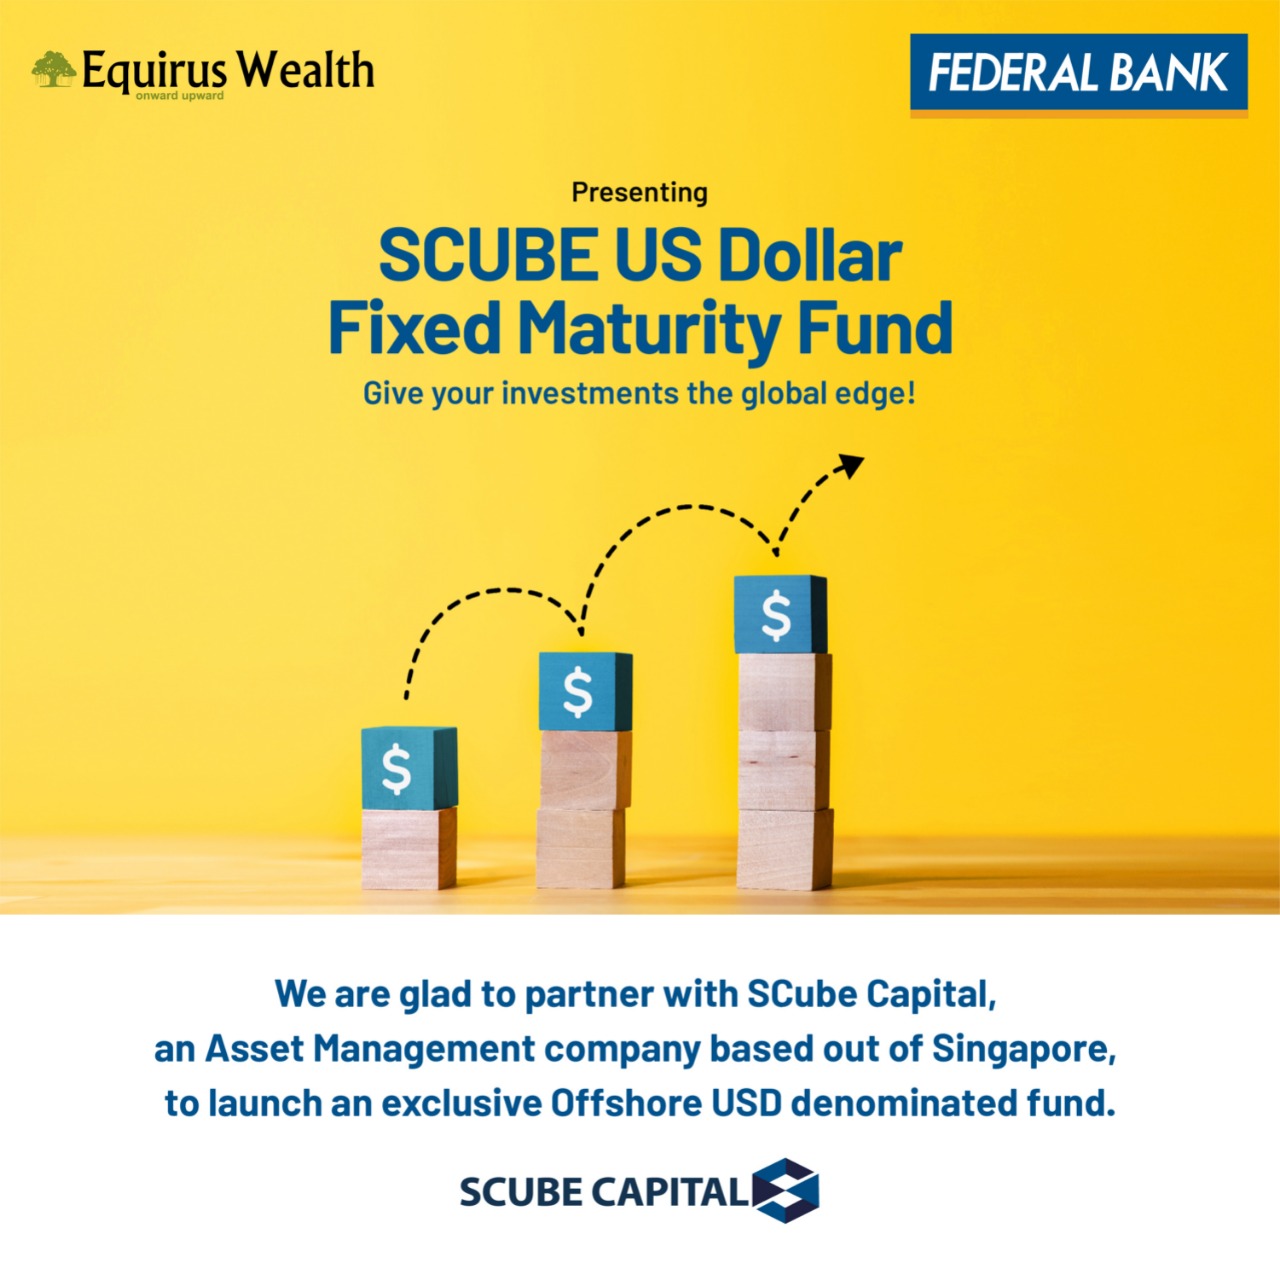 Federal Bank in association with Equirus Wealth launches an exclusive USD Fixed Maturity Fund